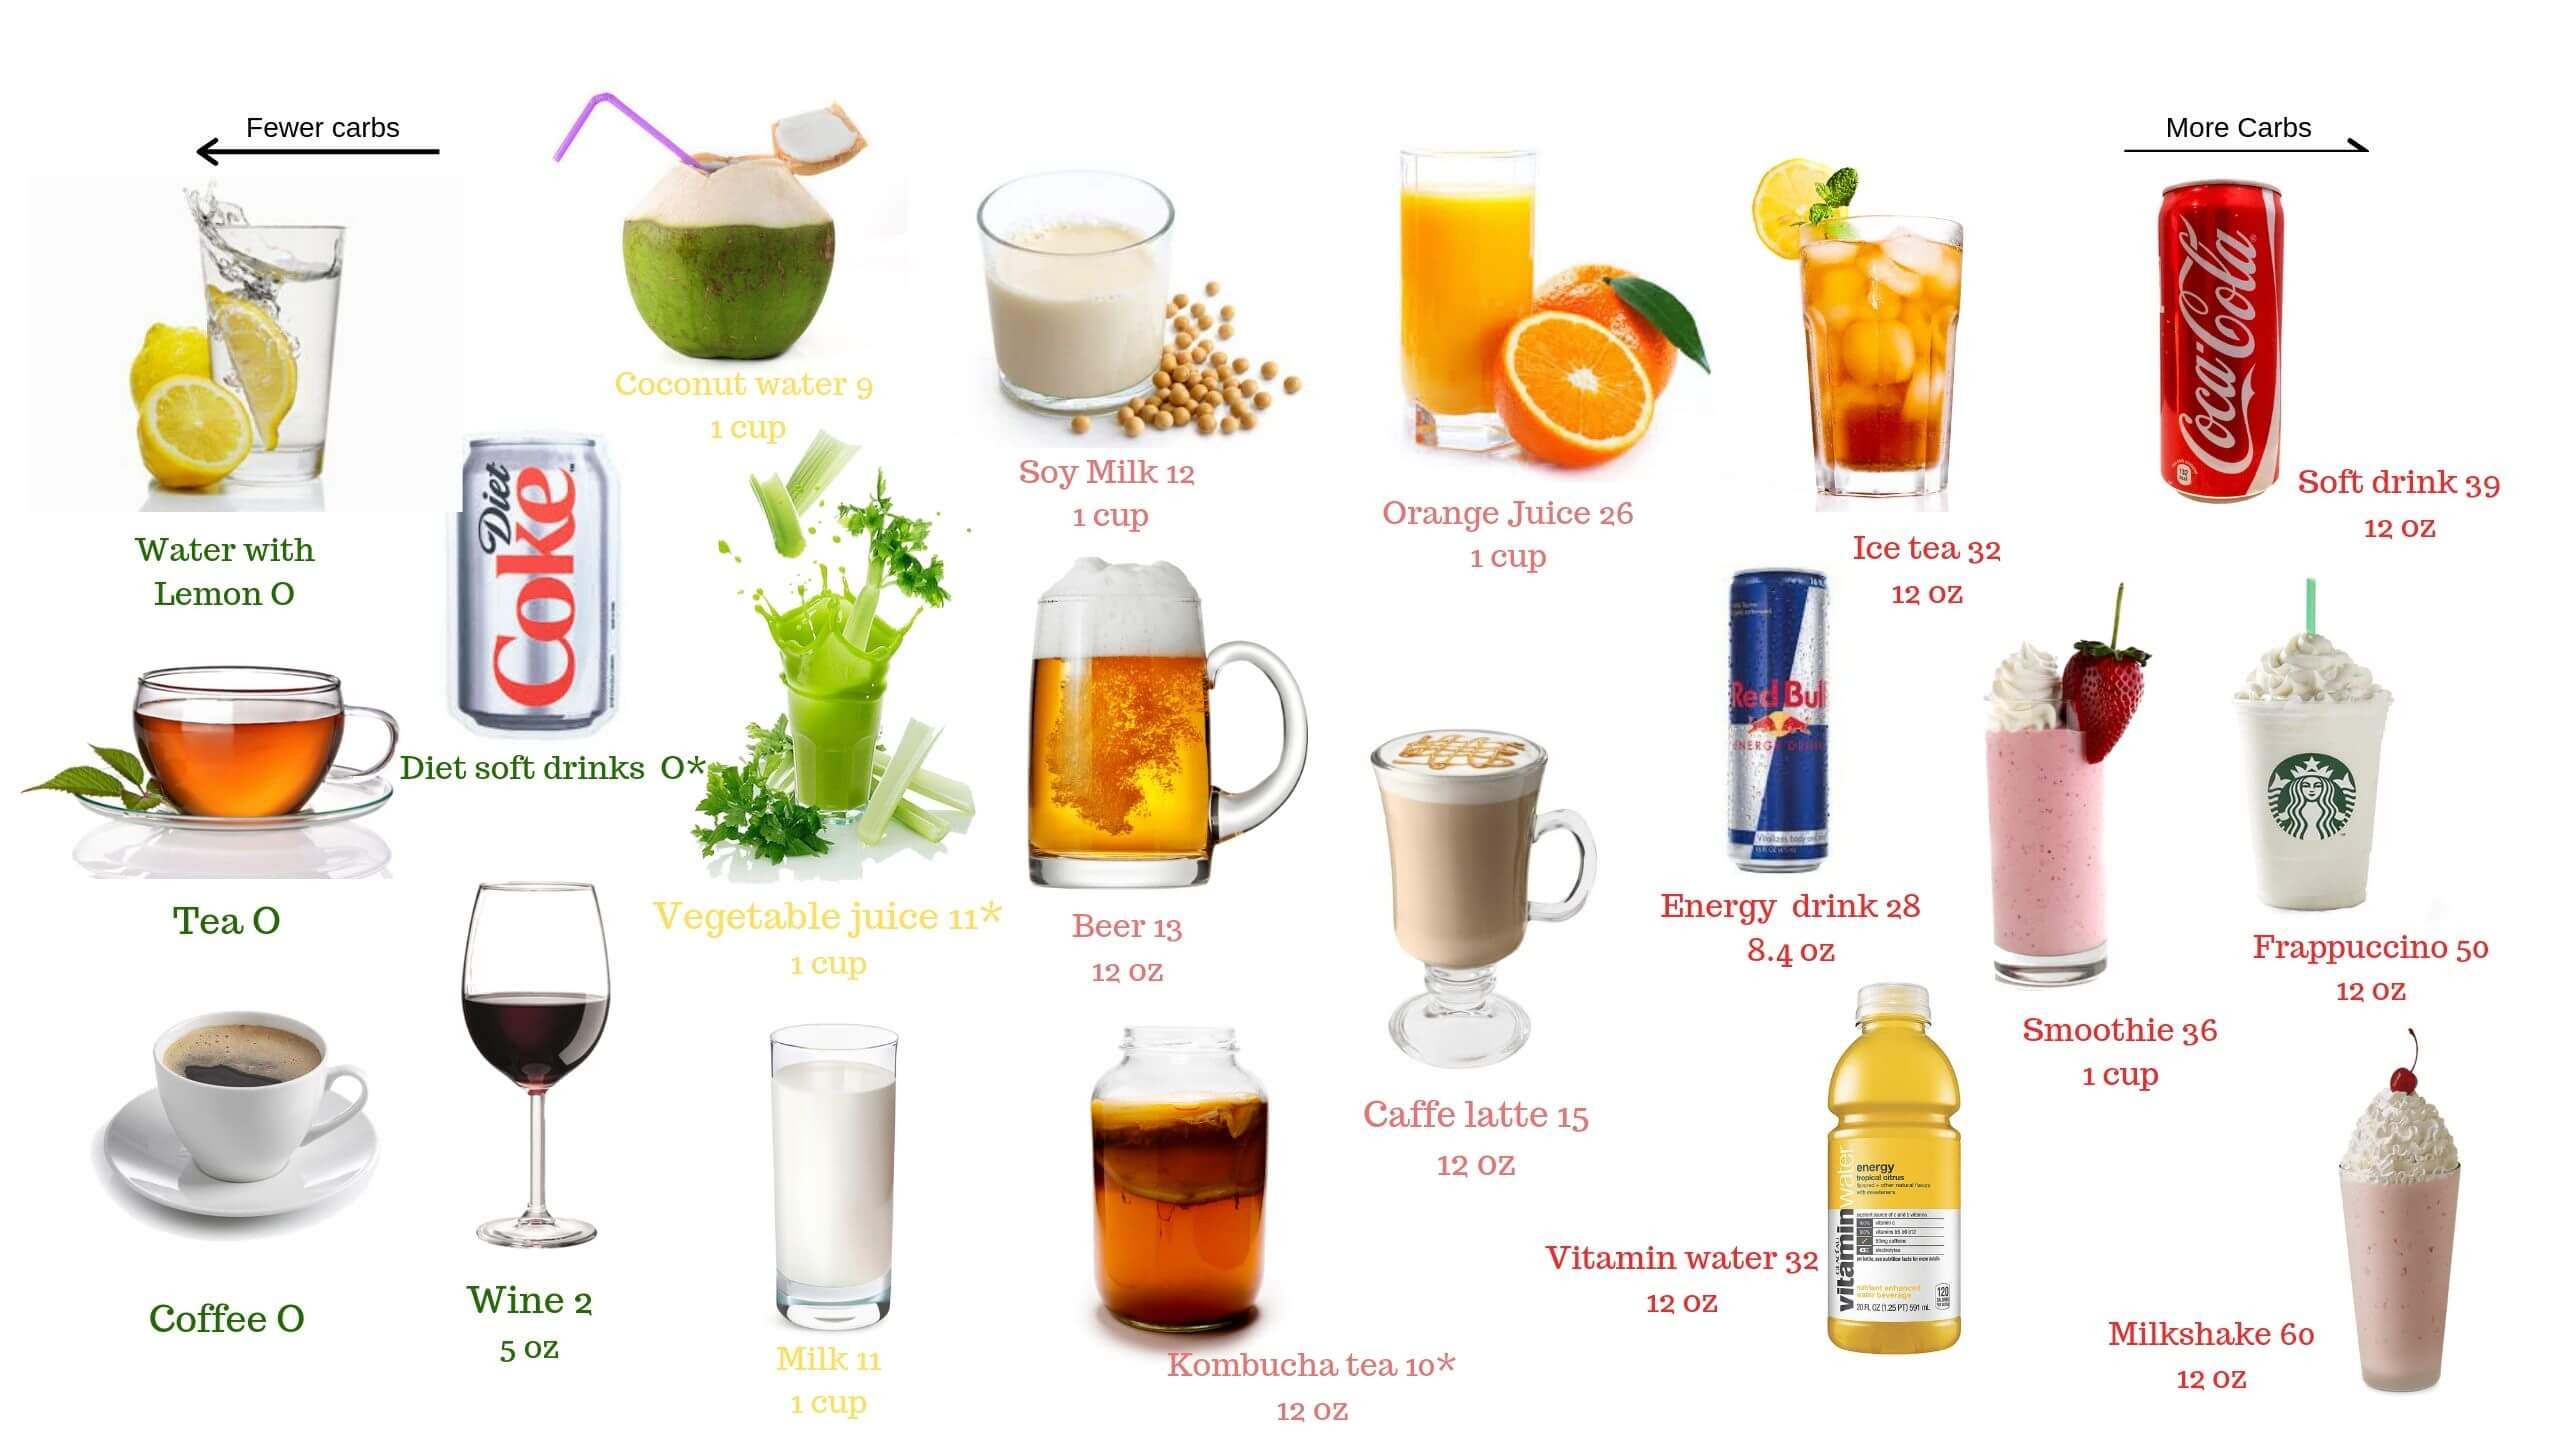 Keto Diet Drinks
 Keto Drinks and Beverages What to Consume and Avoid on Keto